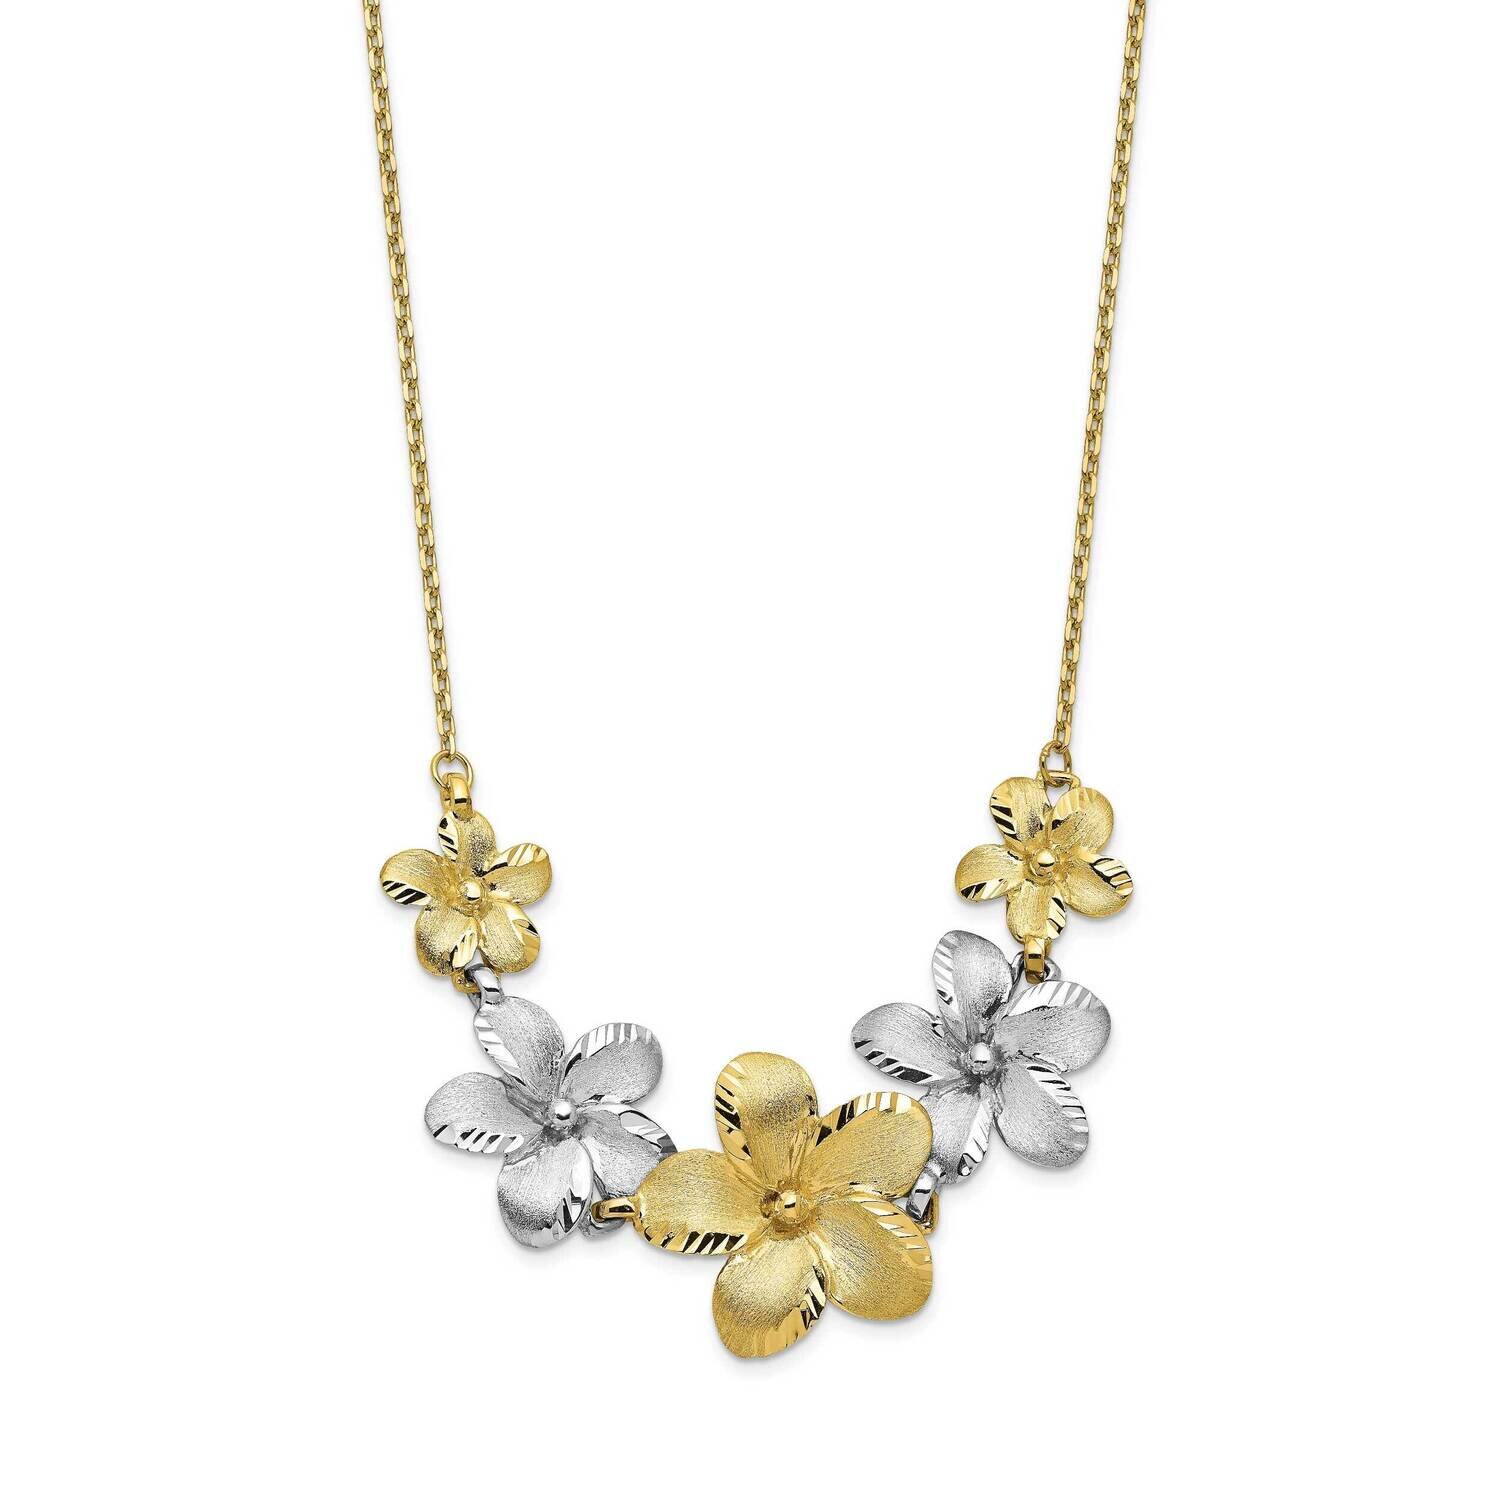 Two-Tone Polished and Brushed Diamond-Cut Flower Necklace 10k Gold HB-10LF590-18